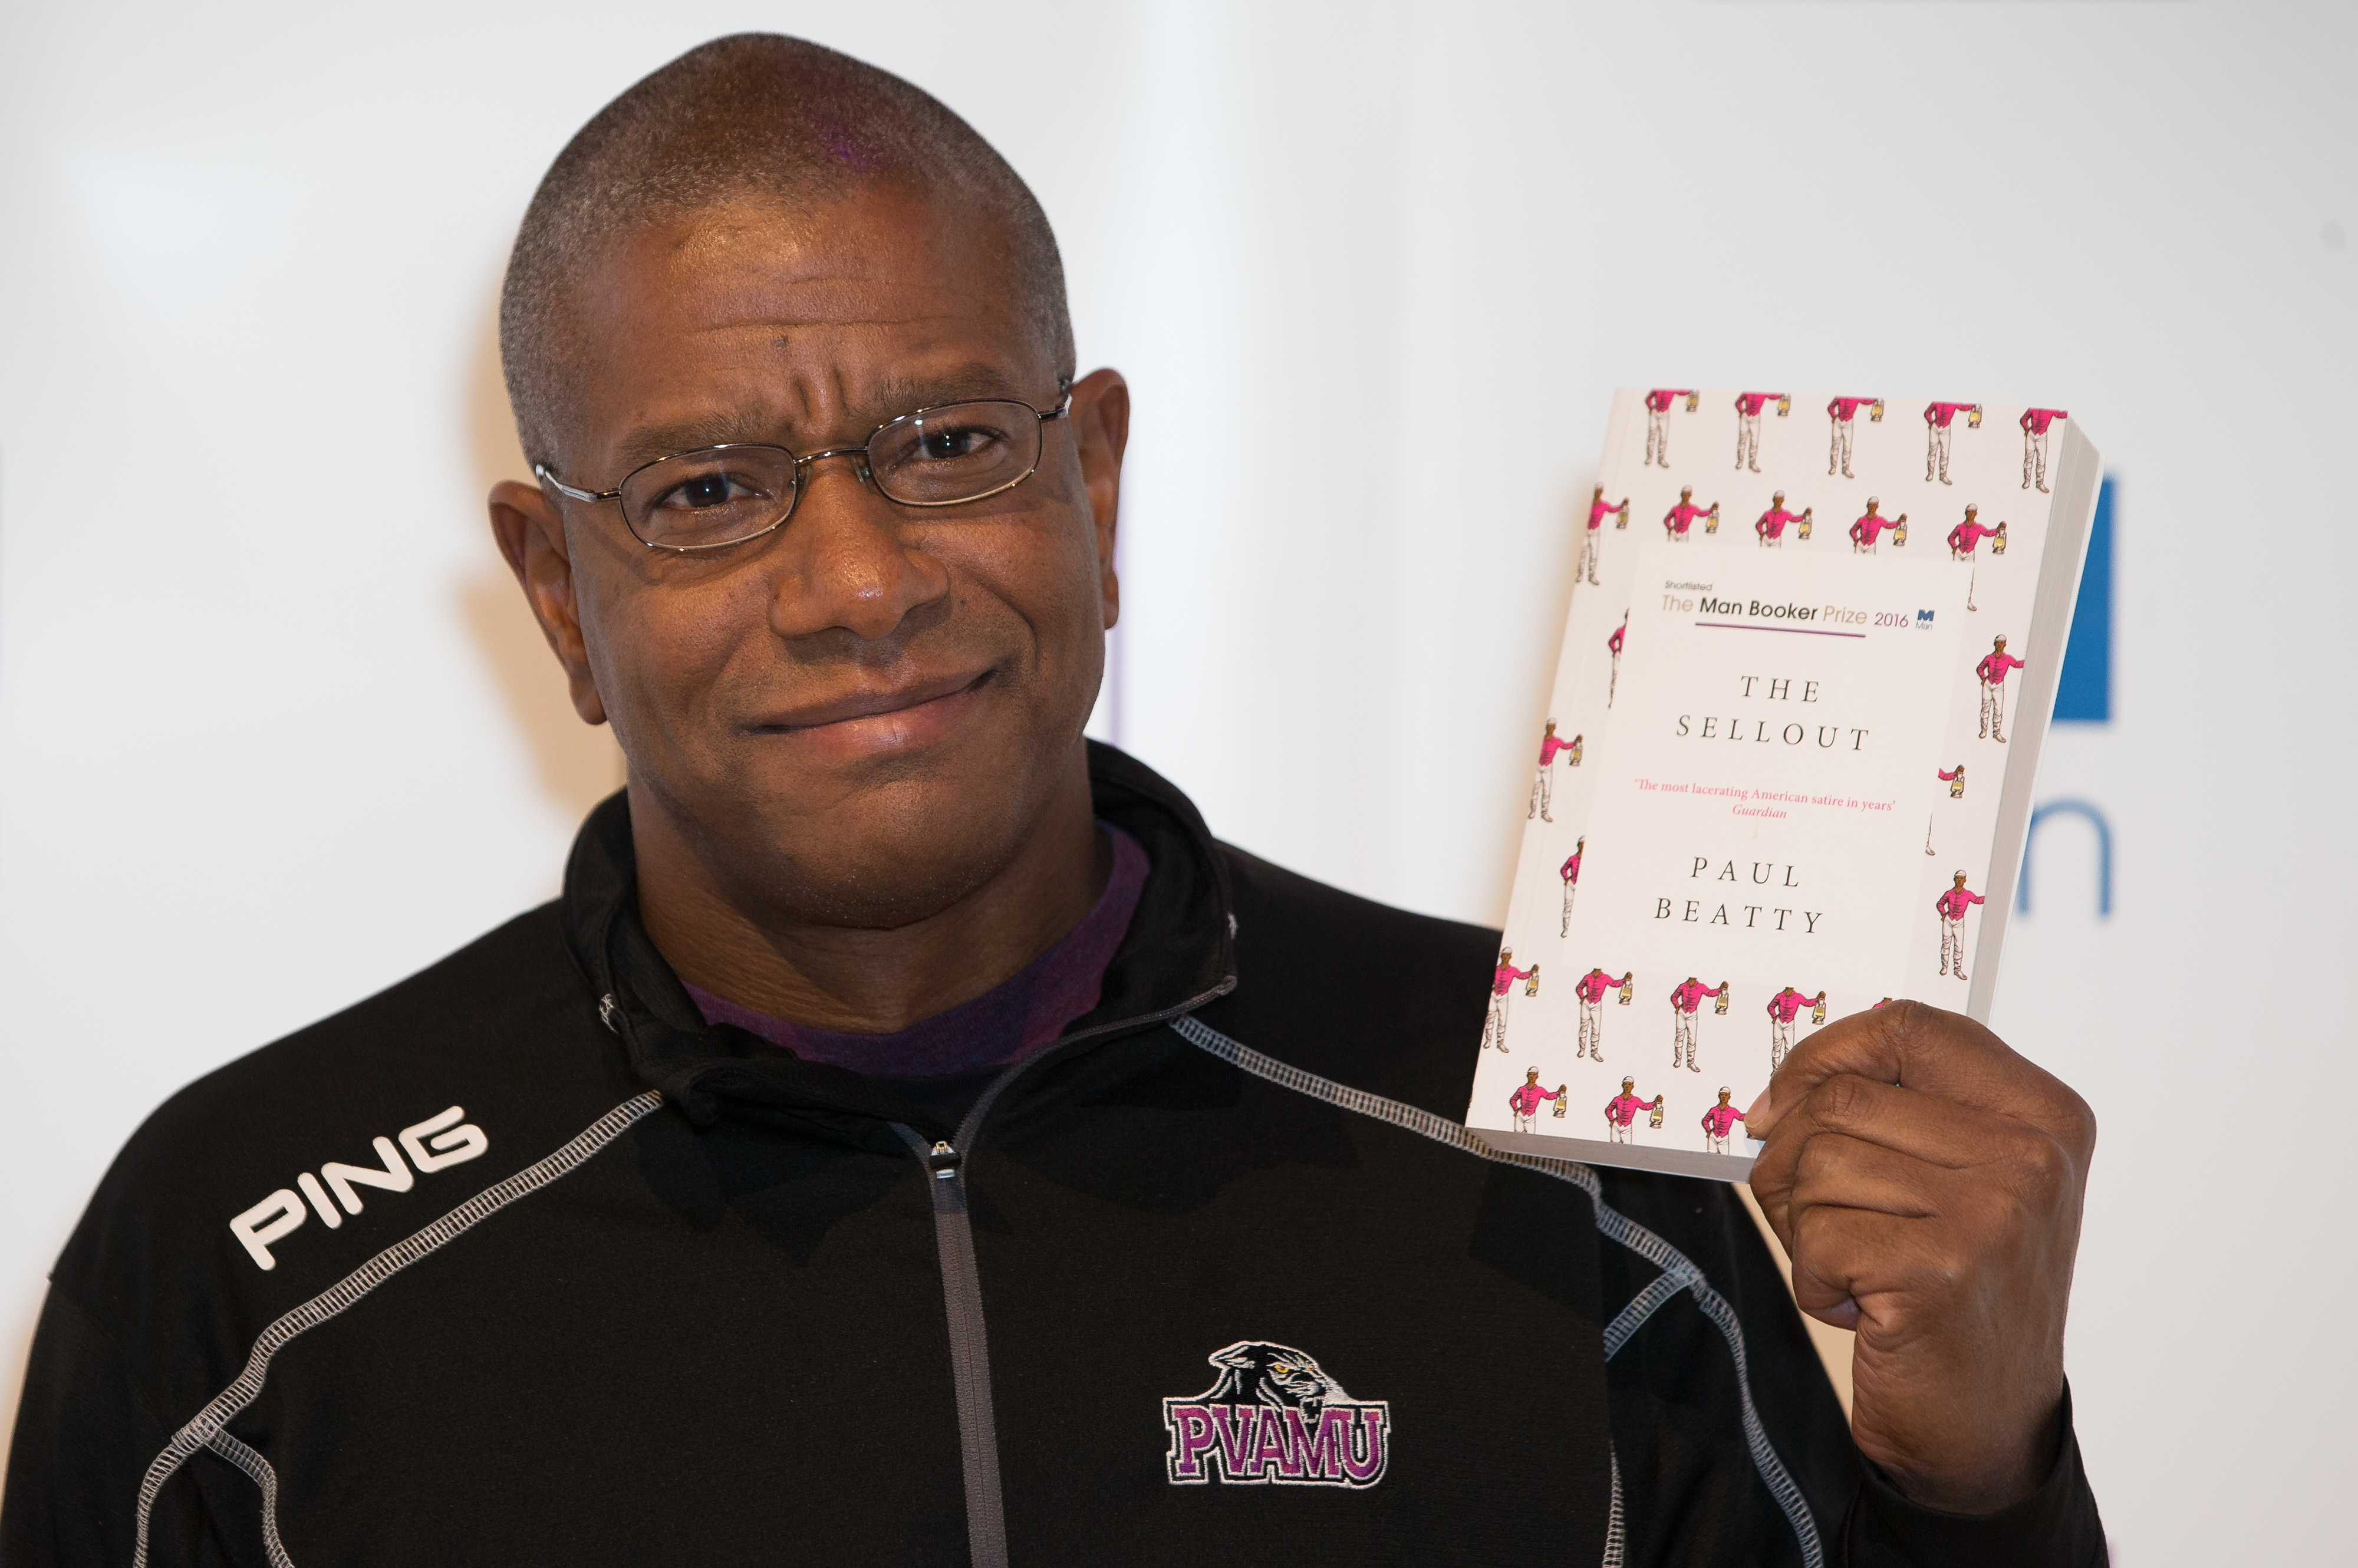 US author Paul Beatty poses for a photograph at a photocall in London on October 24, 2016, ahead of the announcement of the winner of the 2016 Man Booker Prize for Fiction. (DANIEL LEAL-OLIVAS&mdash;AFP/Getty Images)